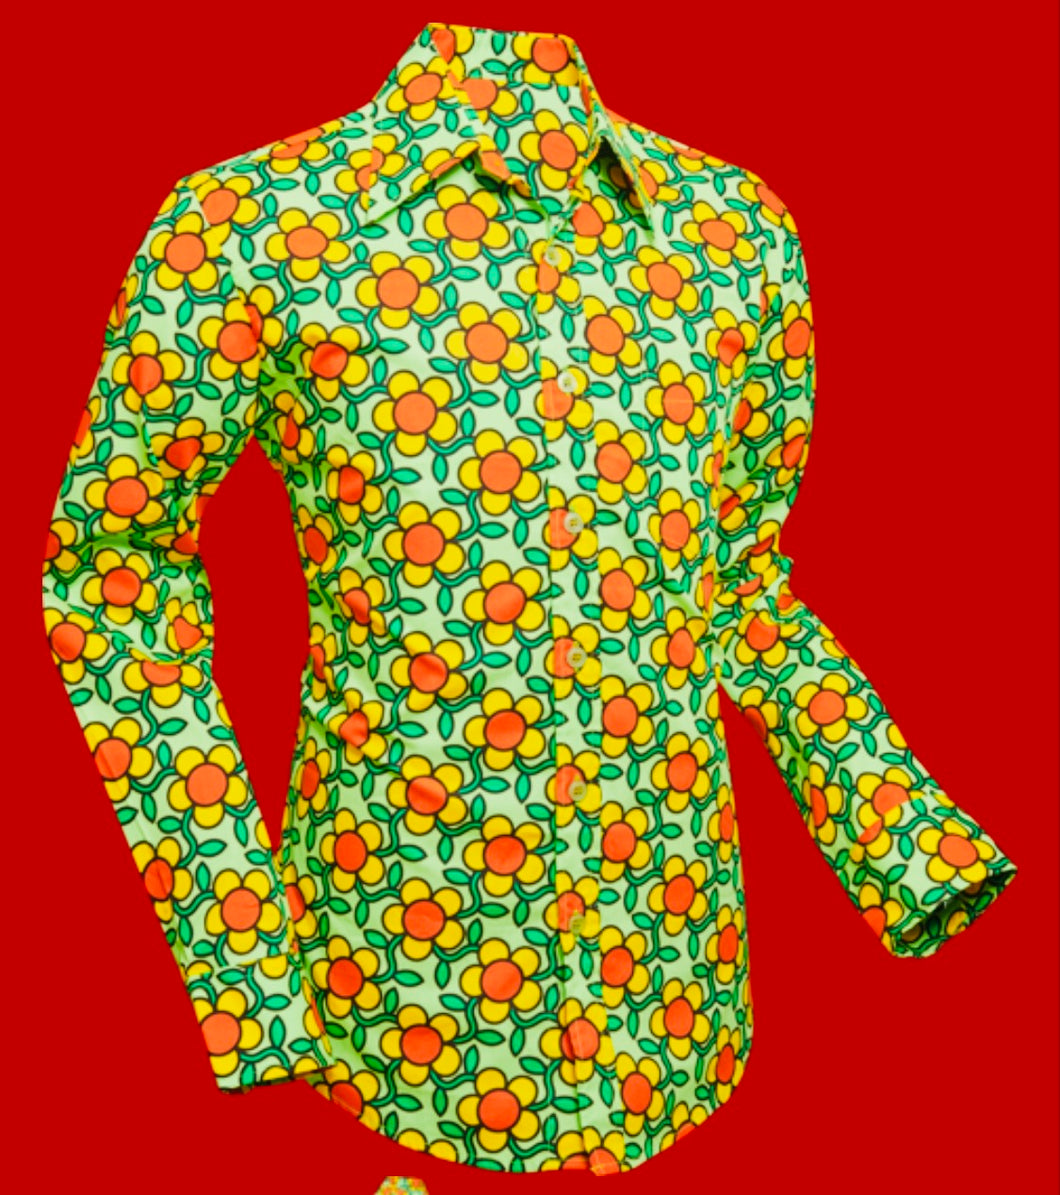 Flowergrid design long sleeved Retro 70s style shirt in Green